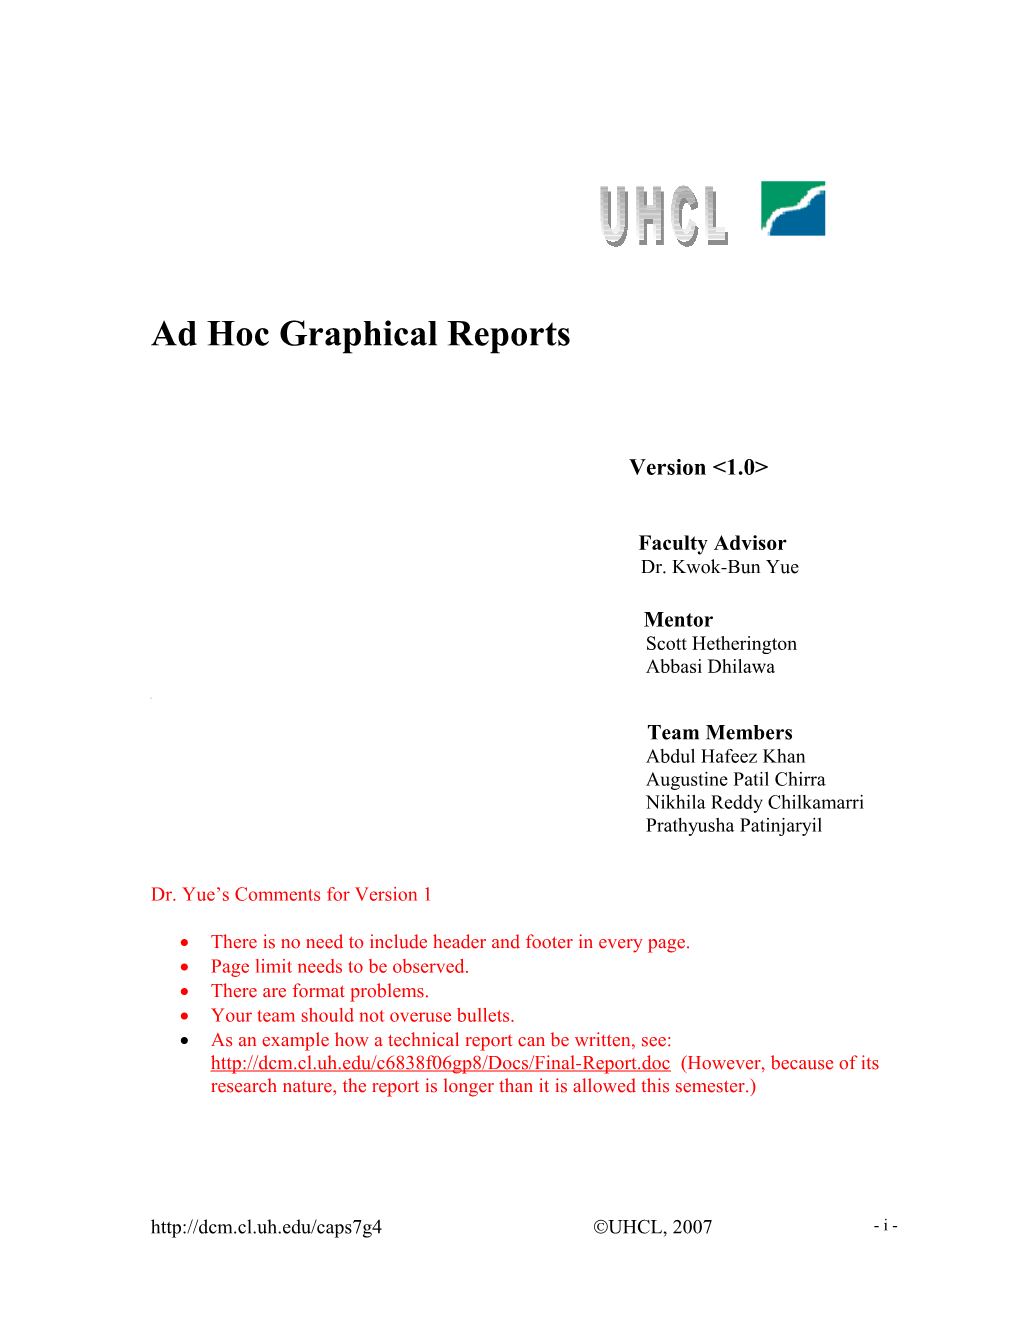 Ad Hoc Graphical Reports